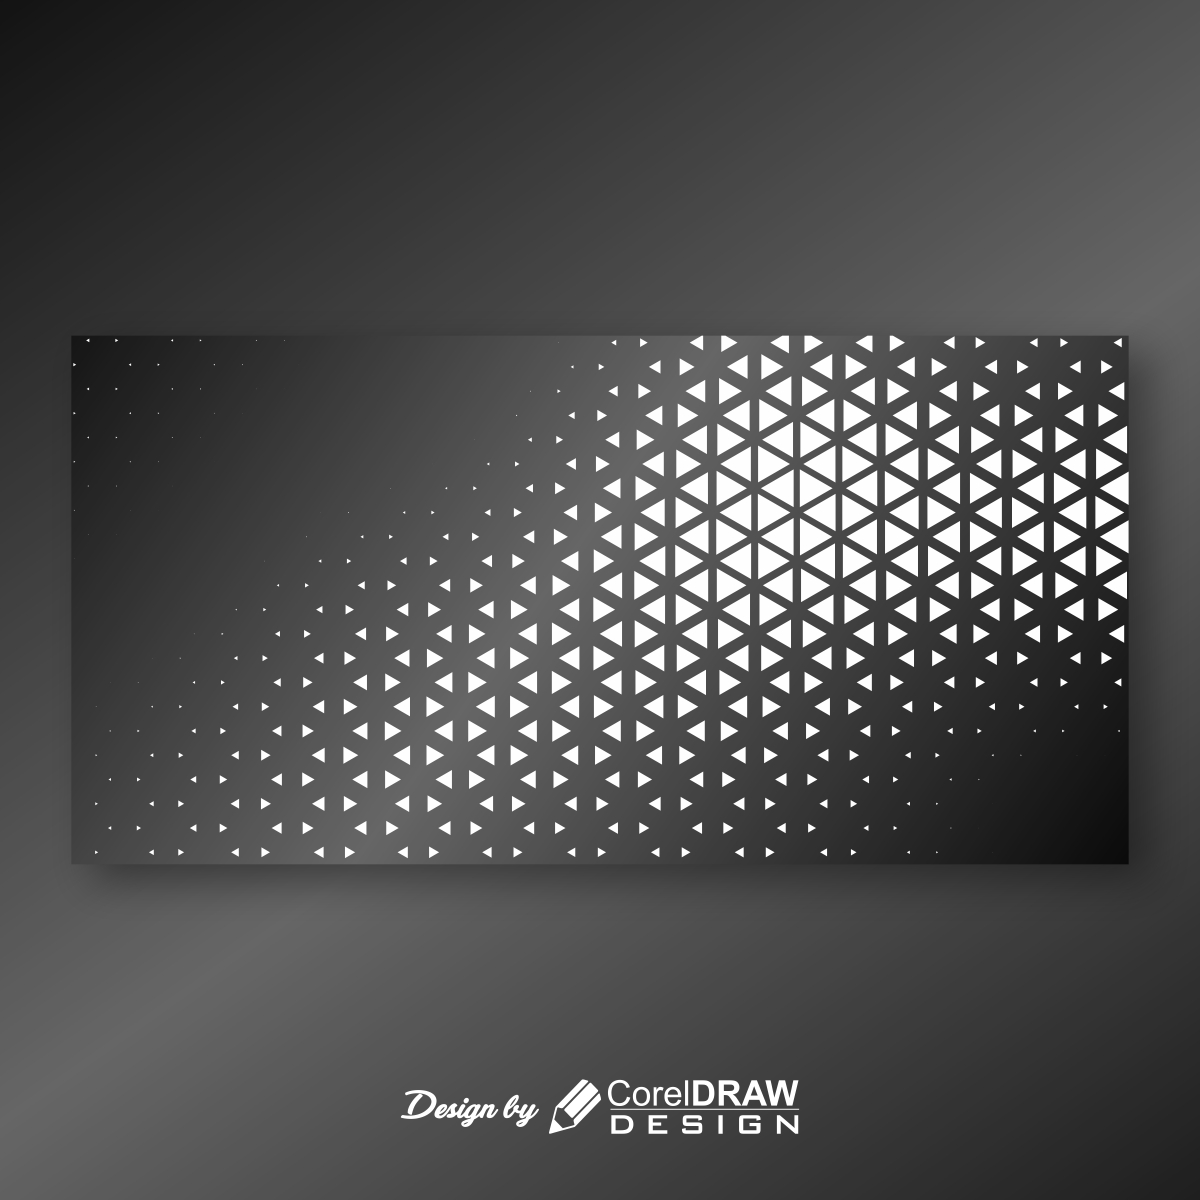 Download Poly Black and White background 2021 trending Free vector Cdr  download | CorelDraw Design (Download Free CDR, Vector, Stock Images,  Tutorials, Tips & Tricks)